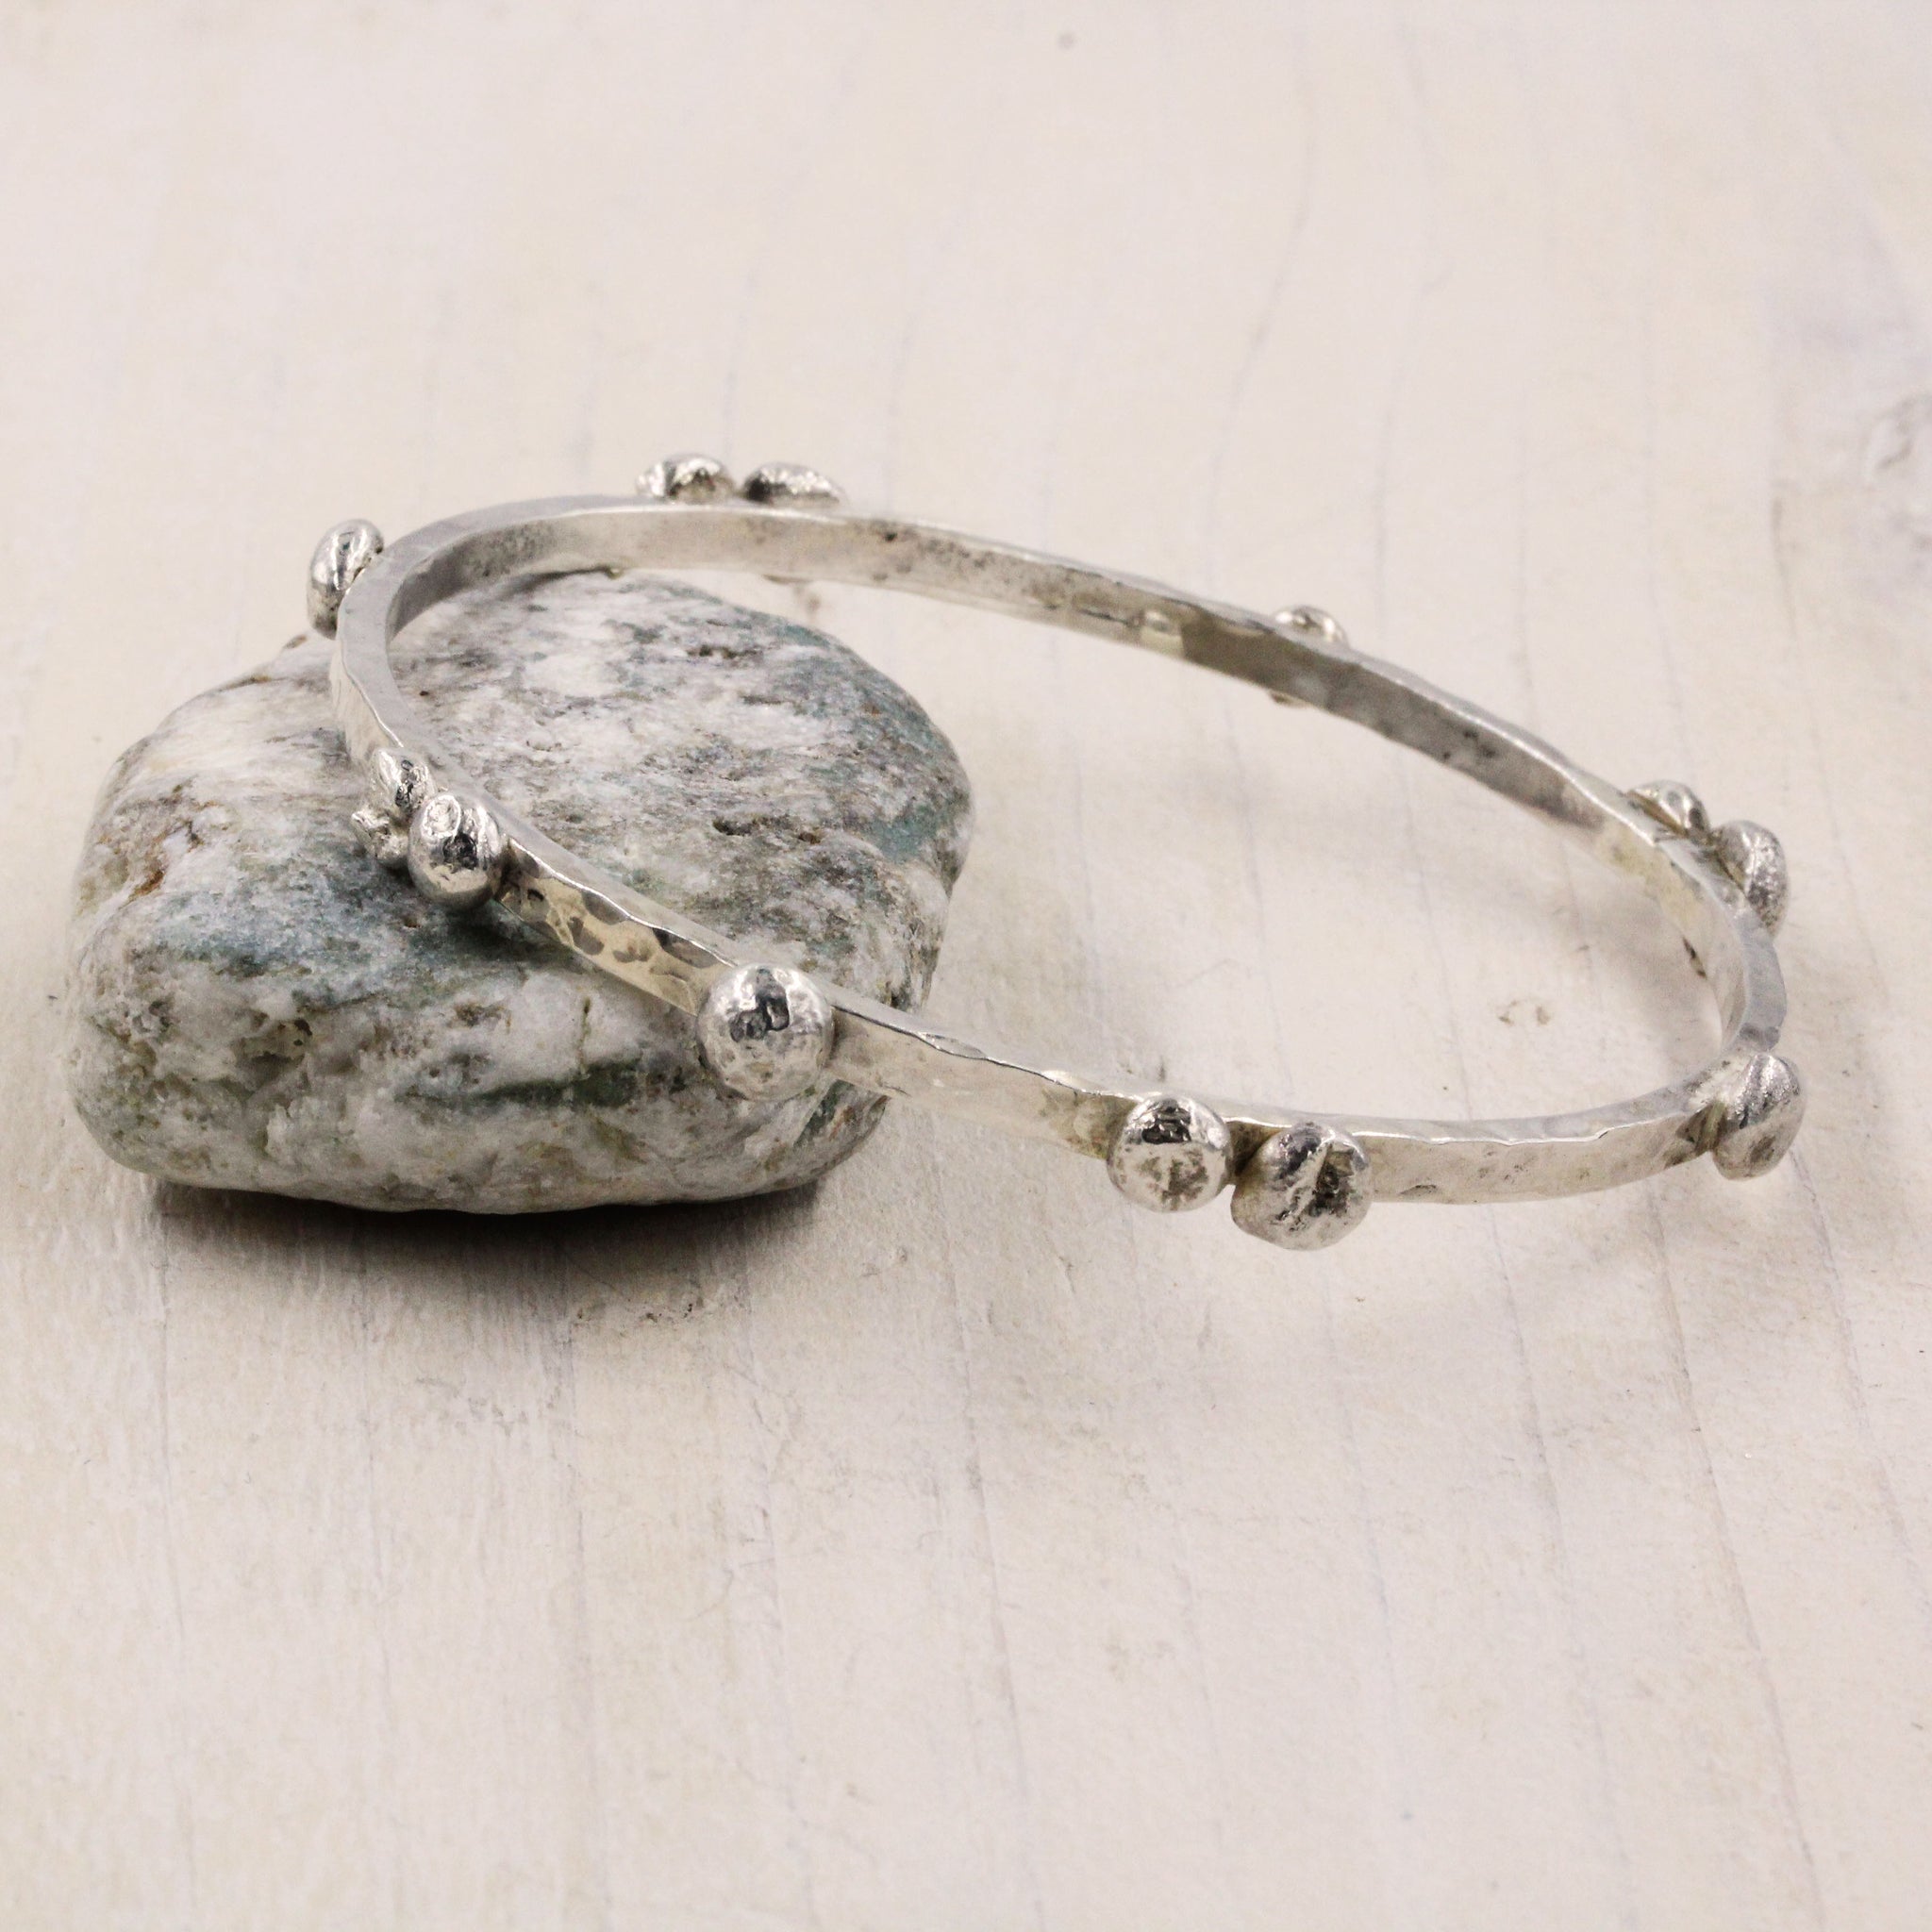 Handcrafted Pebbles on the Beach Bangle, inspired by the pebbley shorelines of Suffolk and handmade in Sterling Silver 